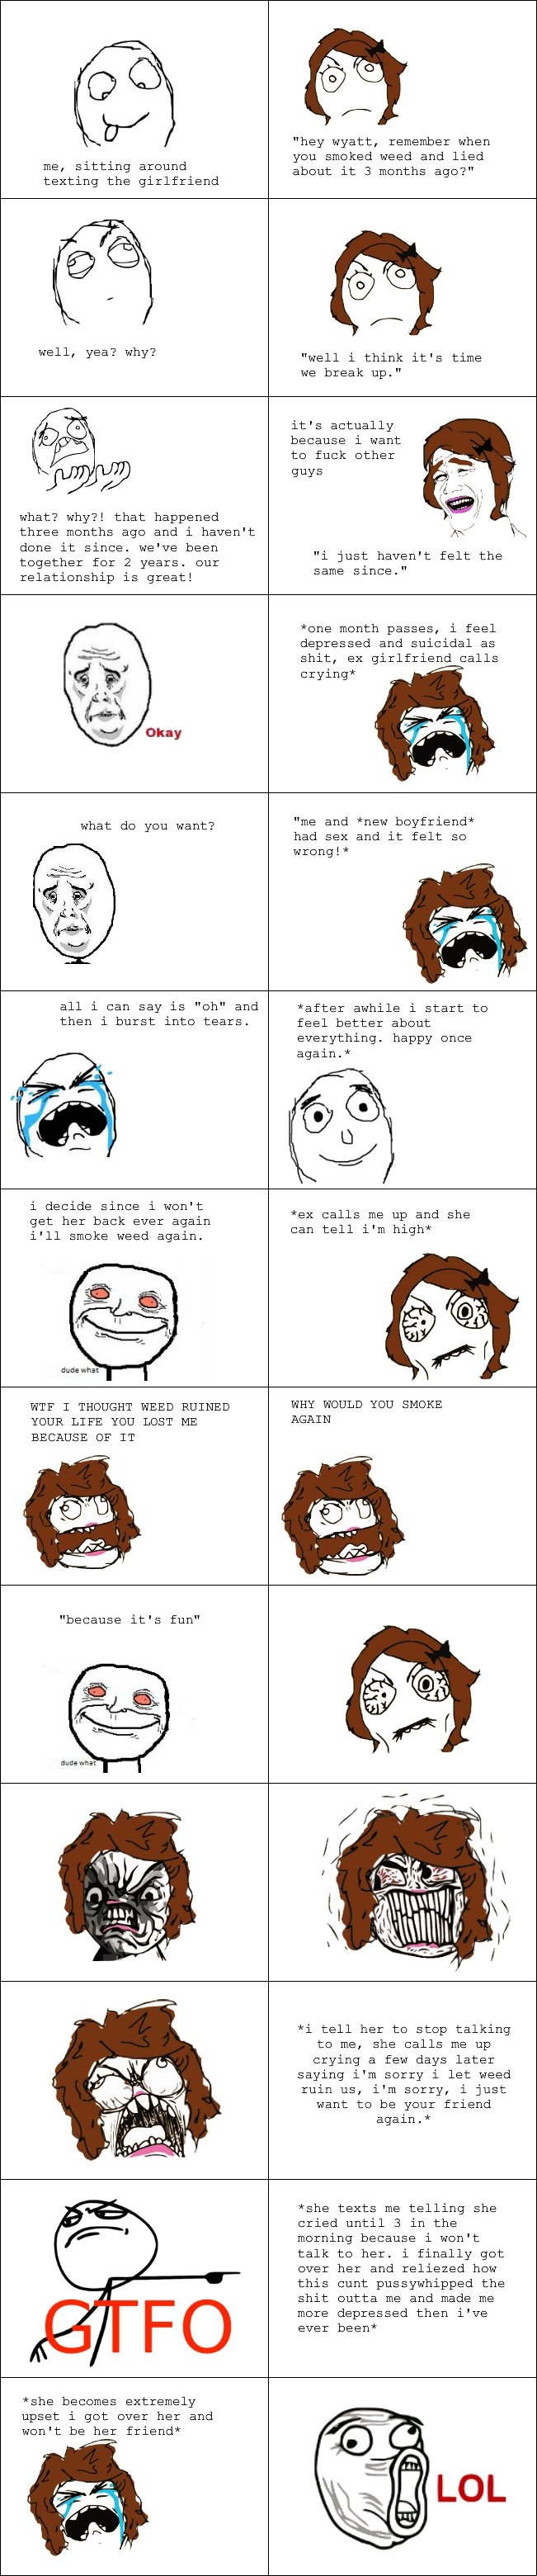 my first rage comic. OC by me. true story too. inb4 its funny